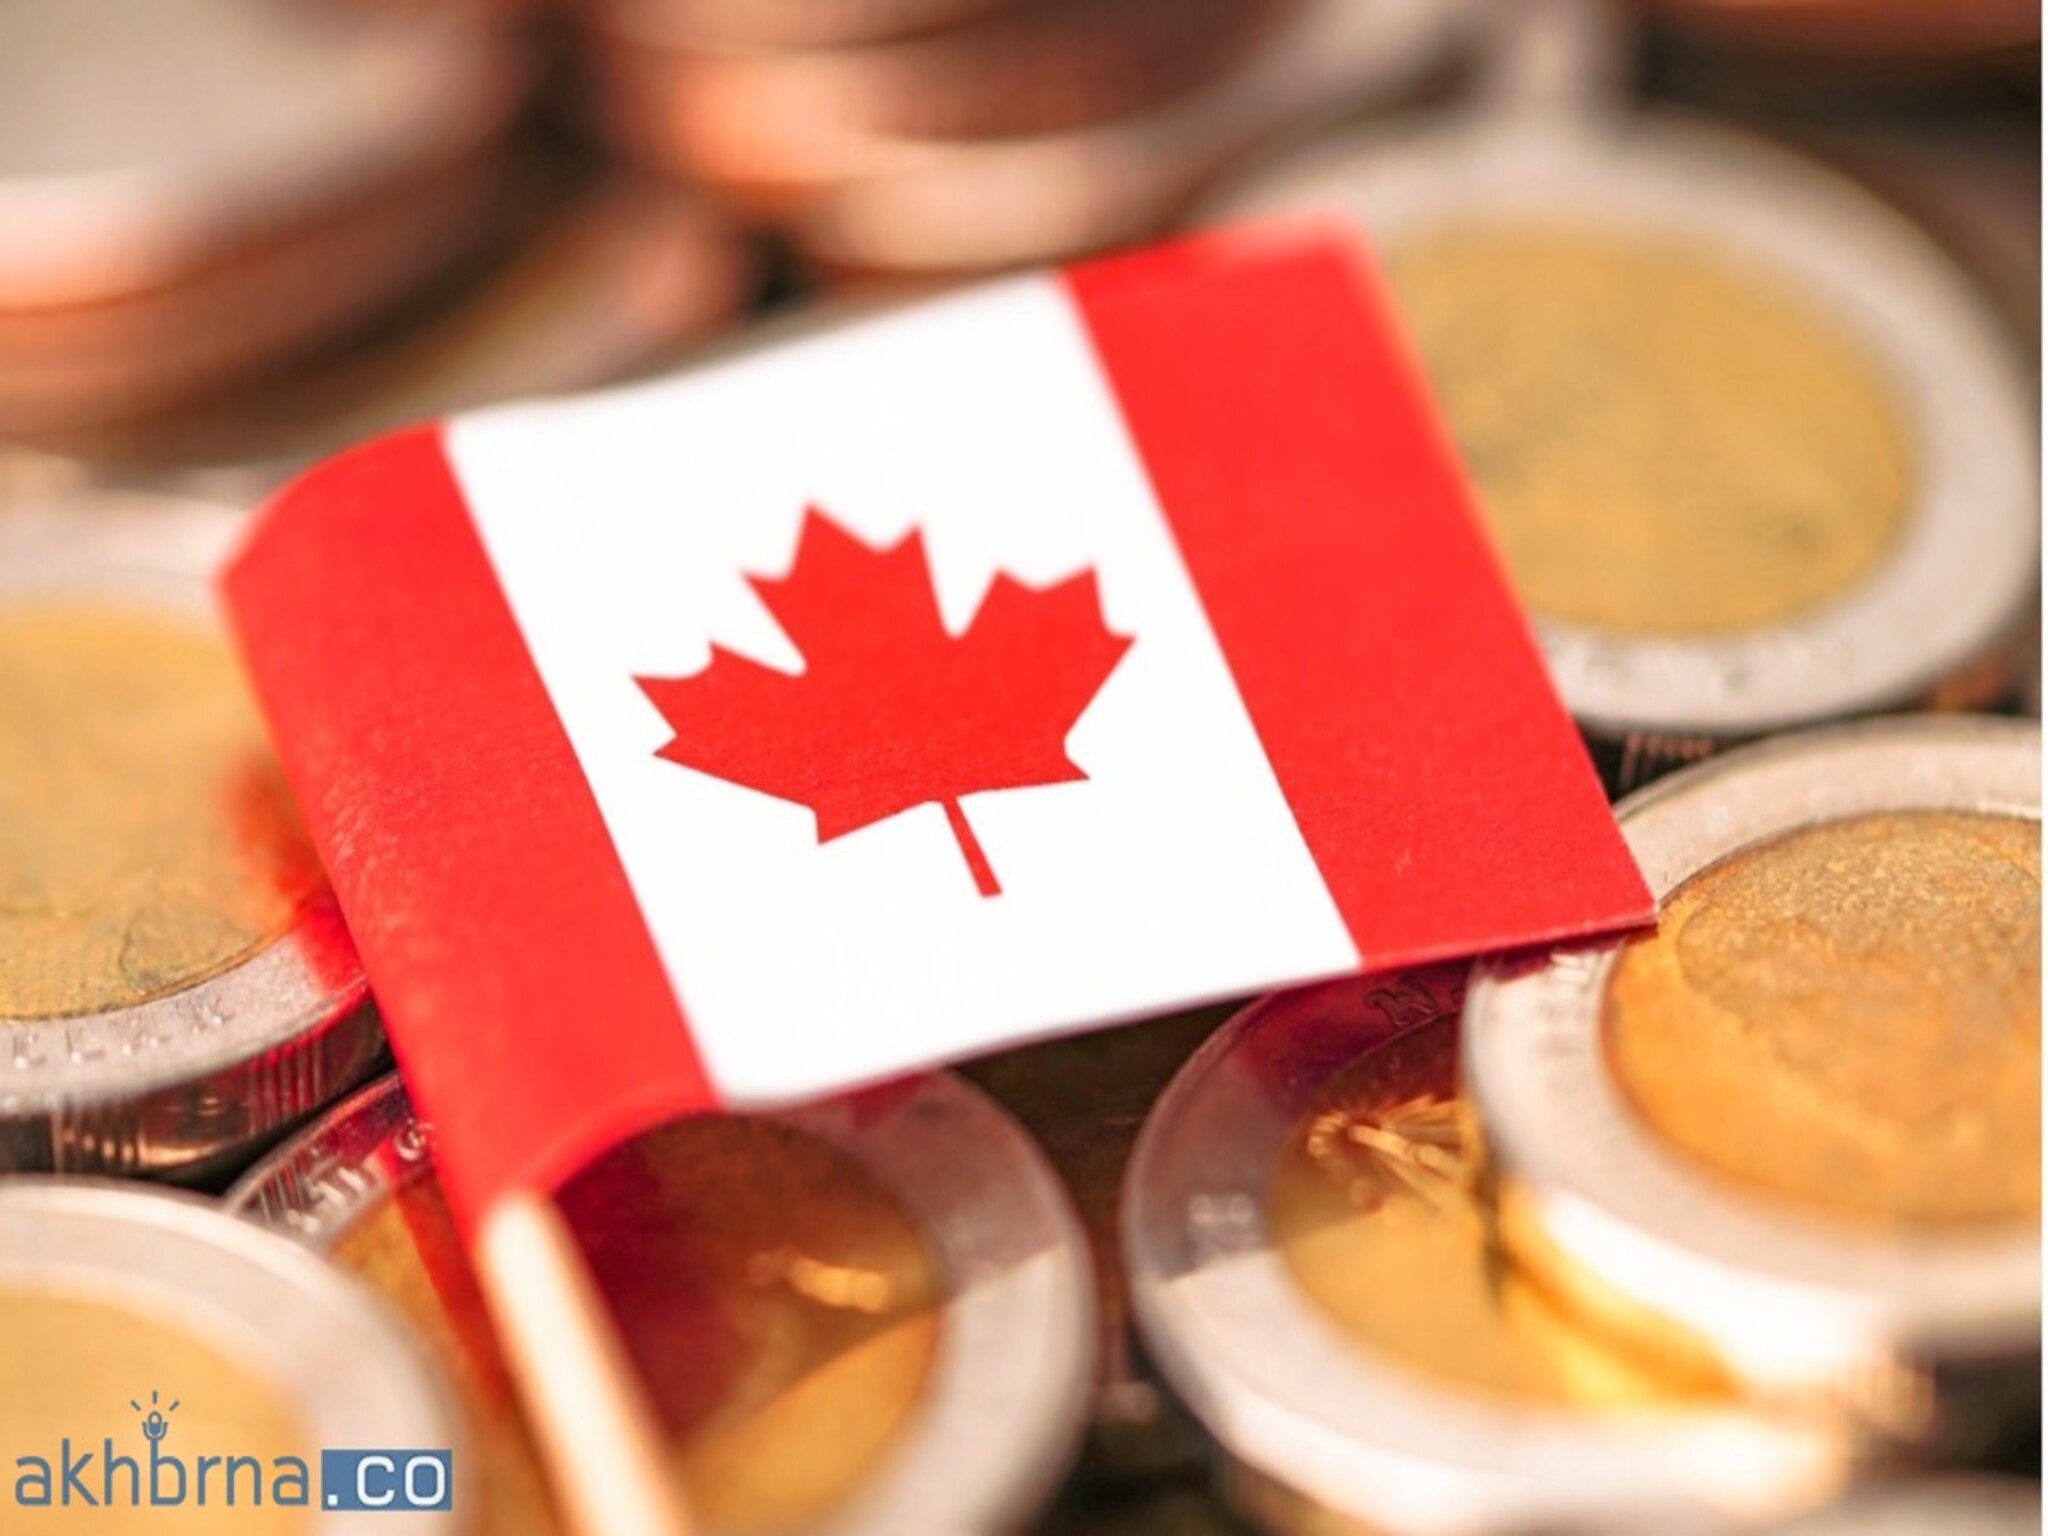 Canada: Minimum wage to increase in four provinces